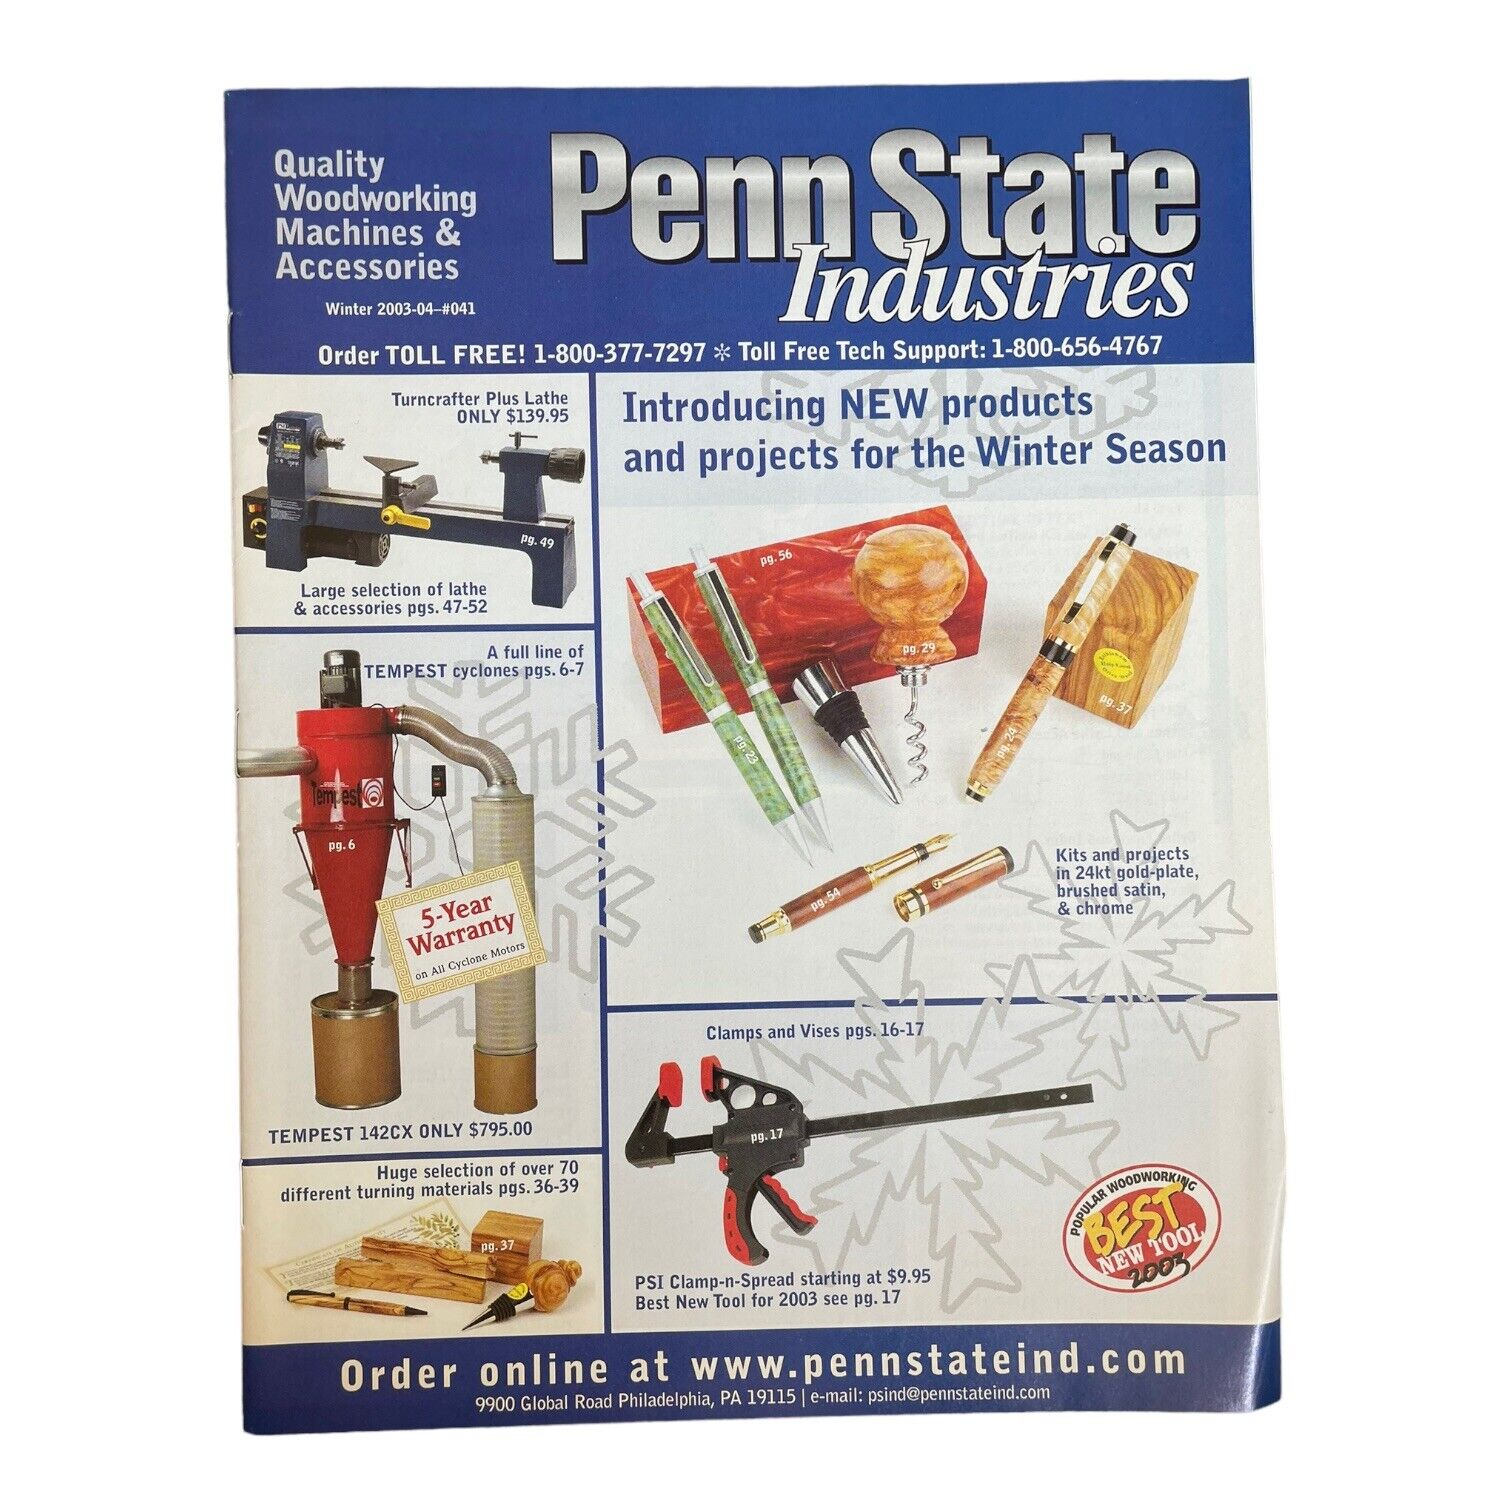 Penn State Industries Catalog Woodworking Machines Parts Accessories 2003 2004